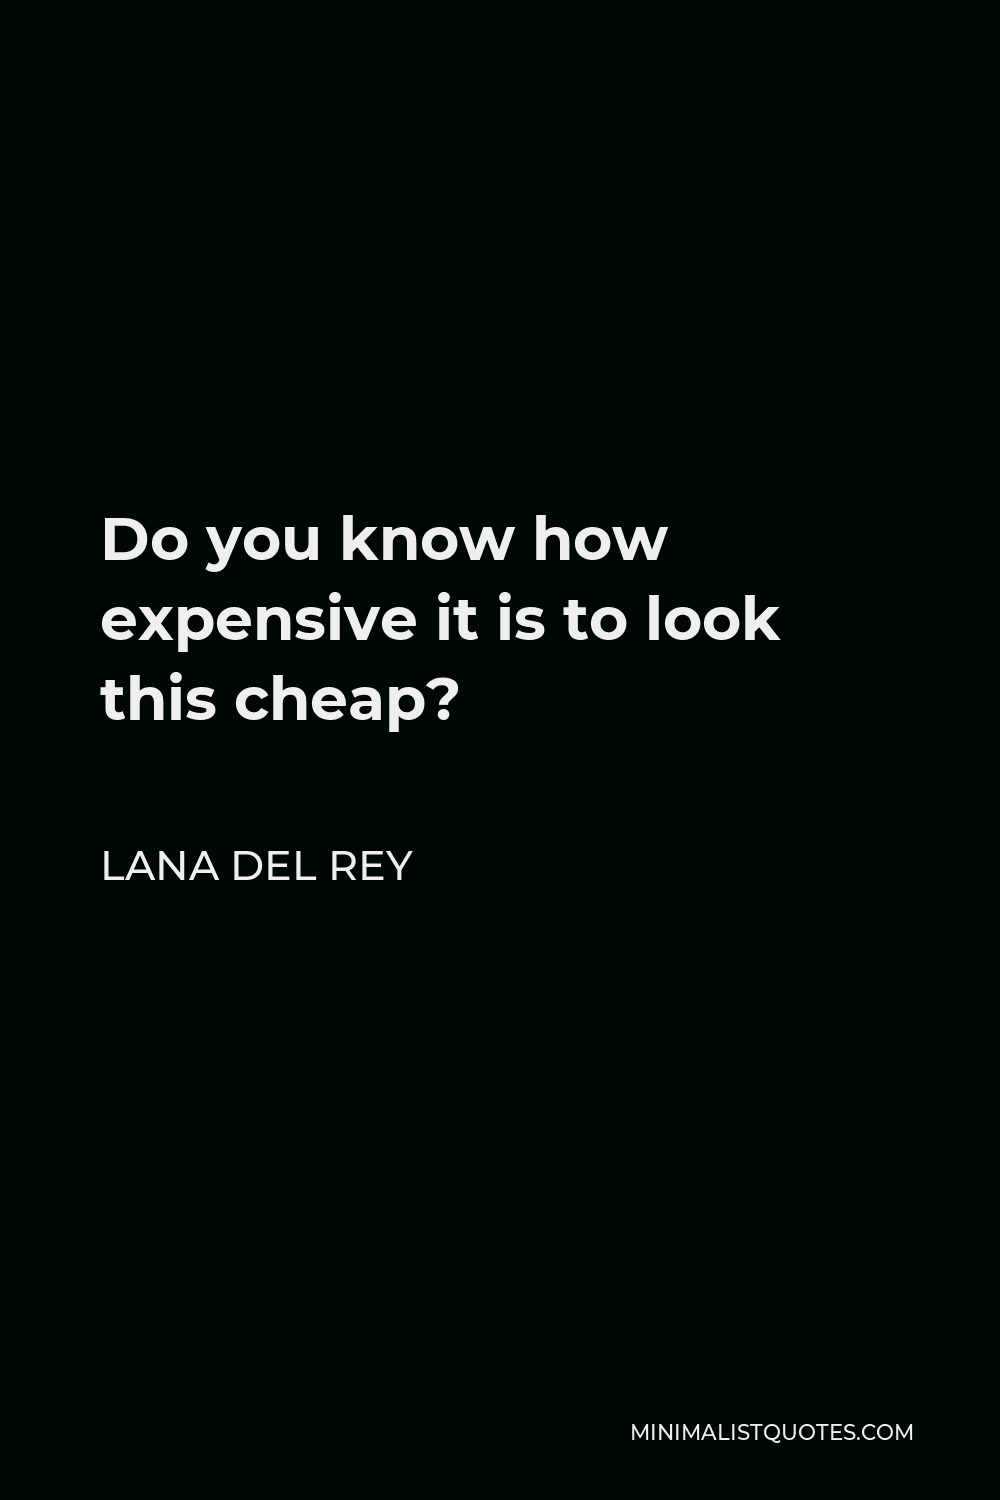 Lana Del Rey Quote - Do you know how expensive it is to look this cheap?